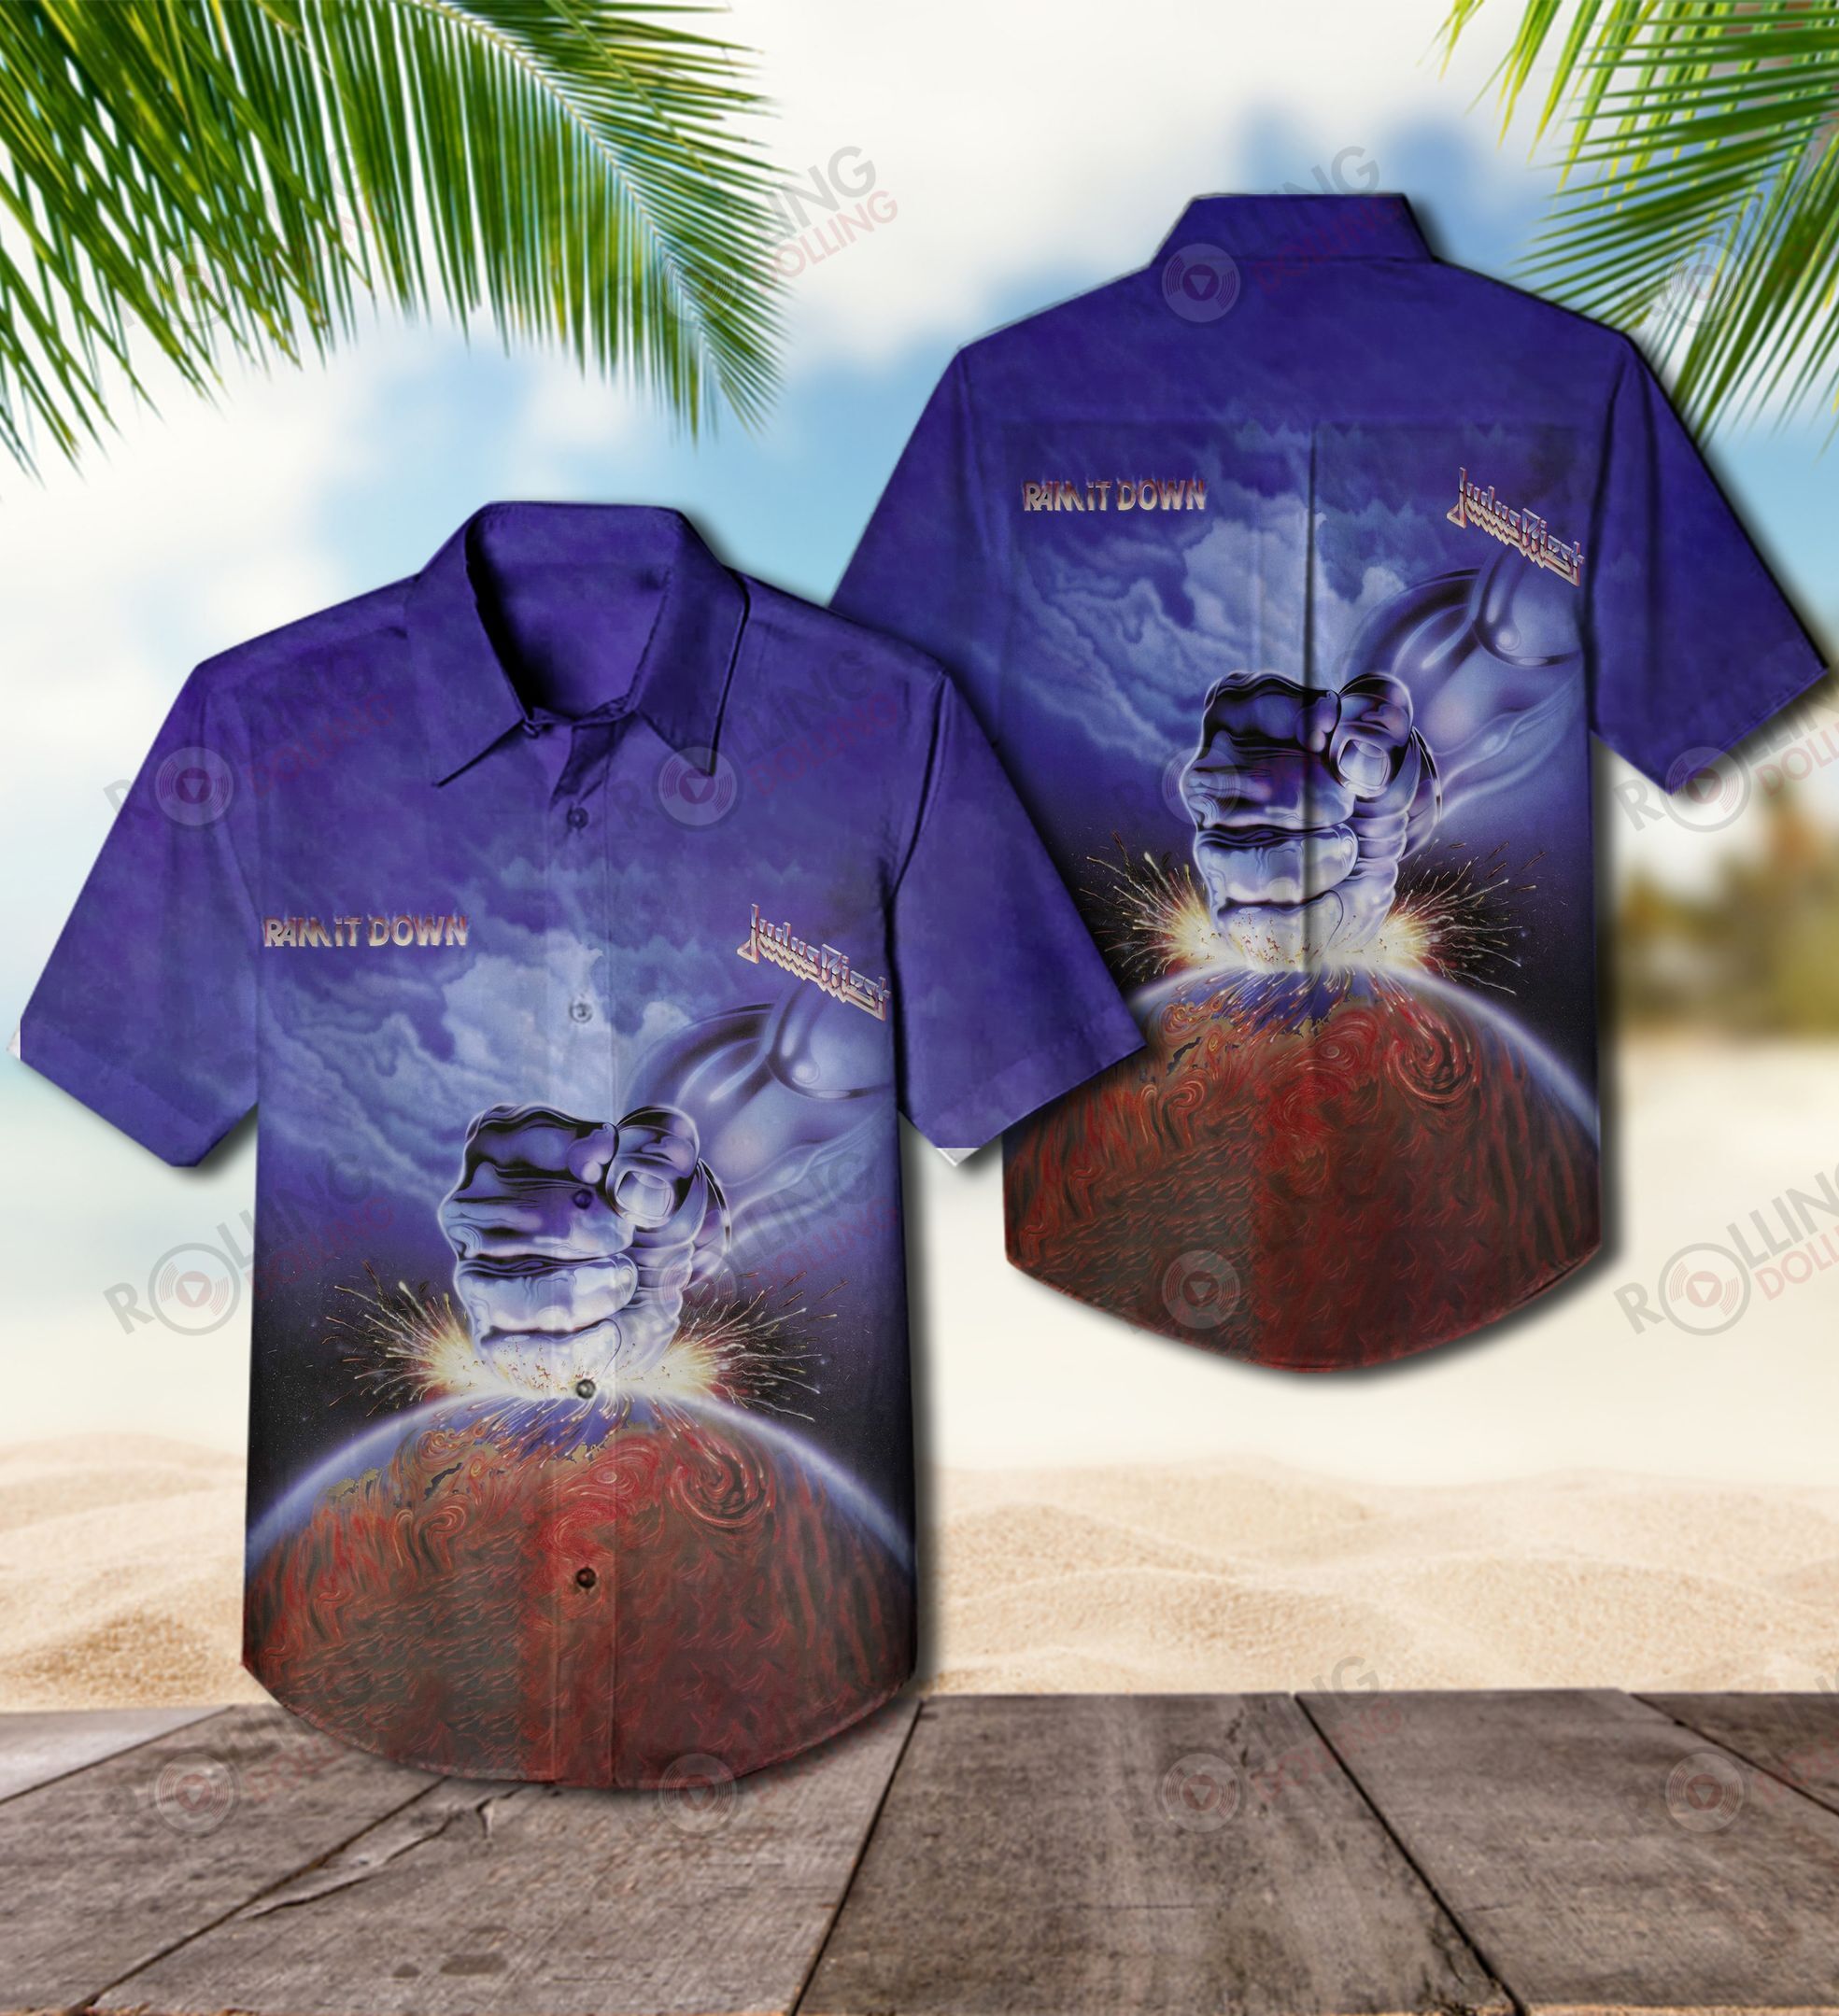 You'll have the perfect vacation outfit with this Hawaiian shirt 159